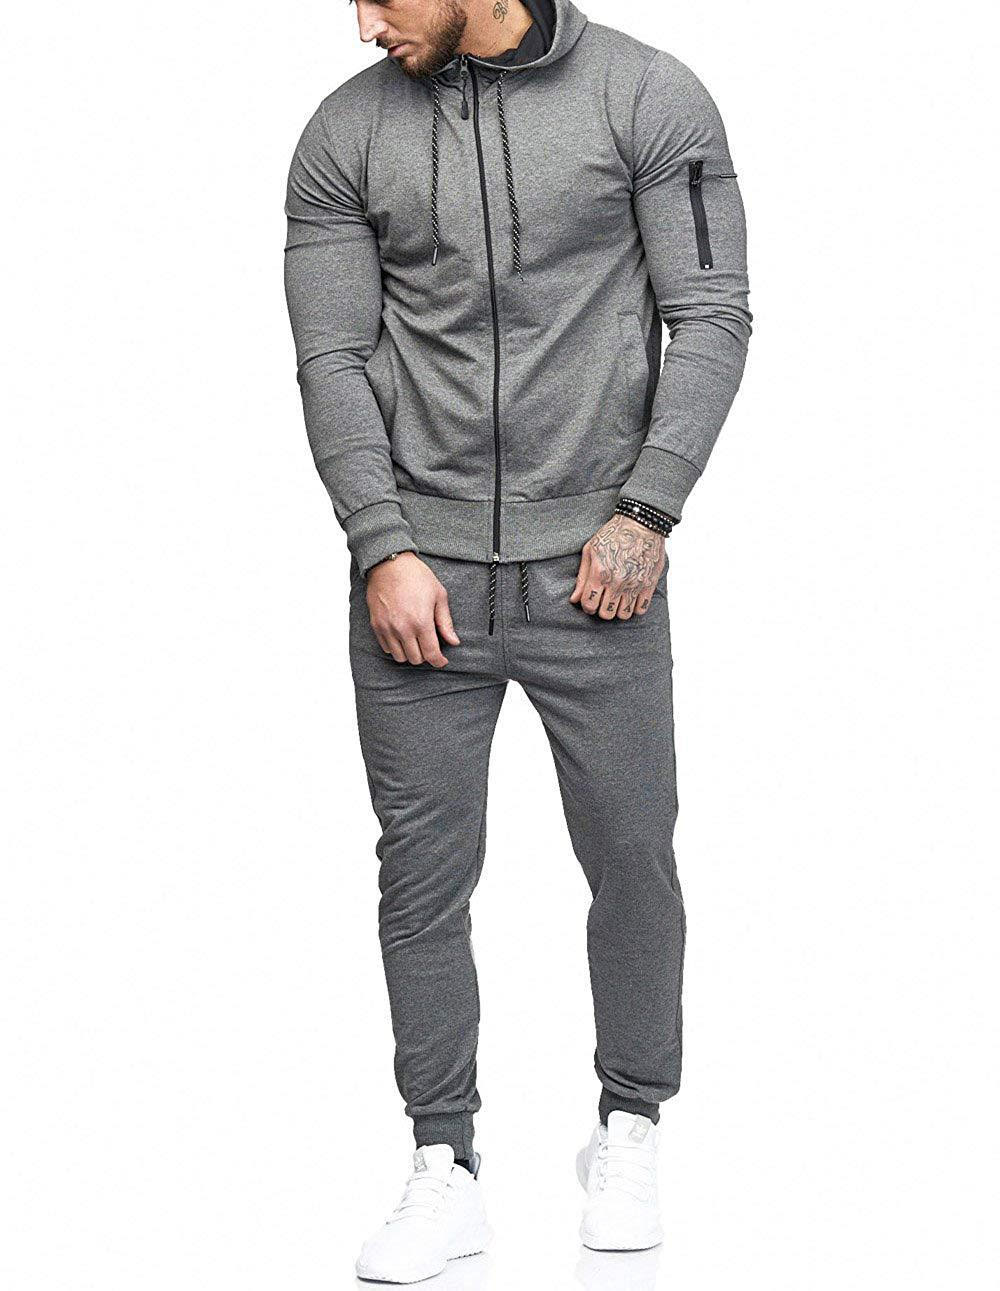 Wholesale Custom Tracksuits For Sale